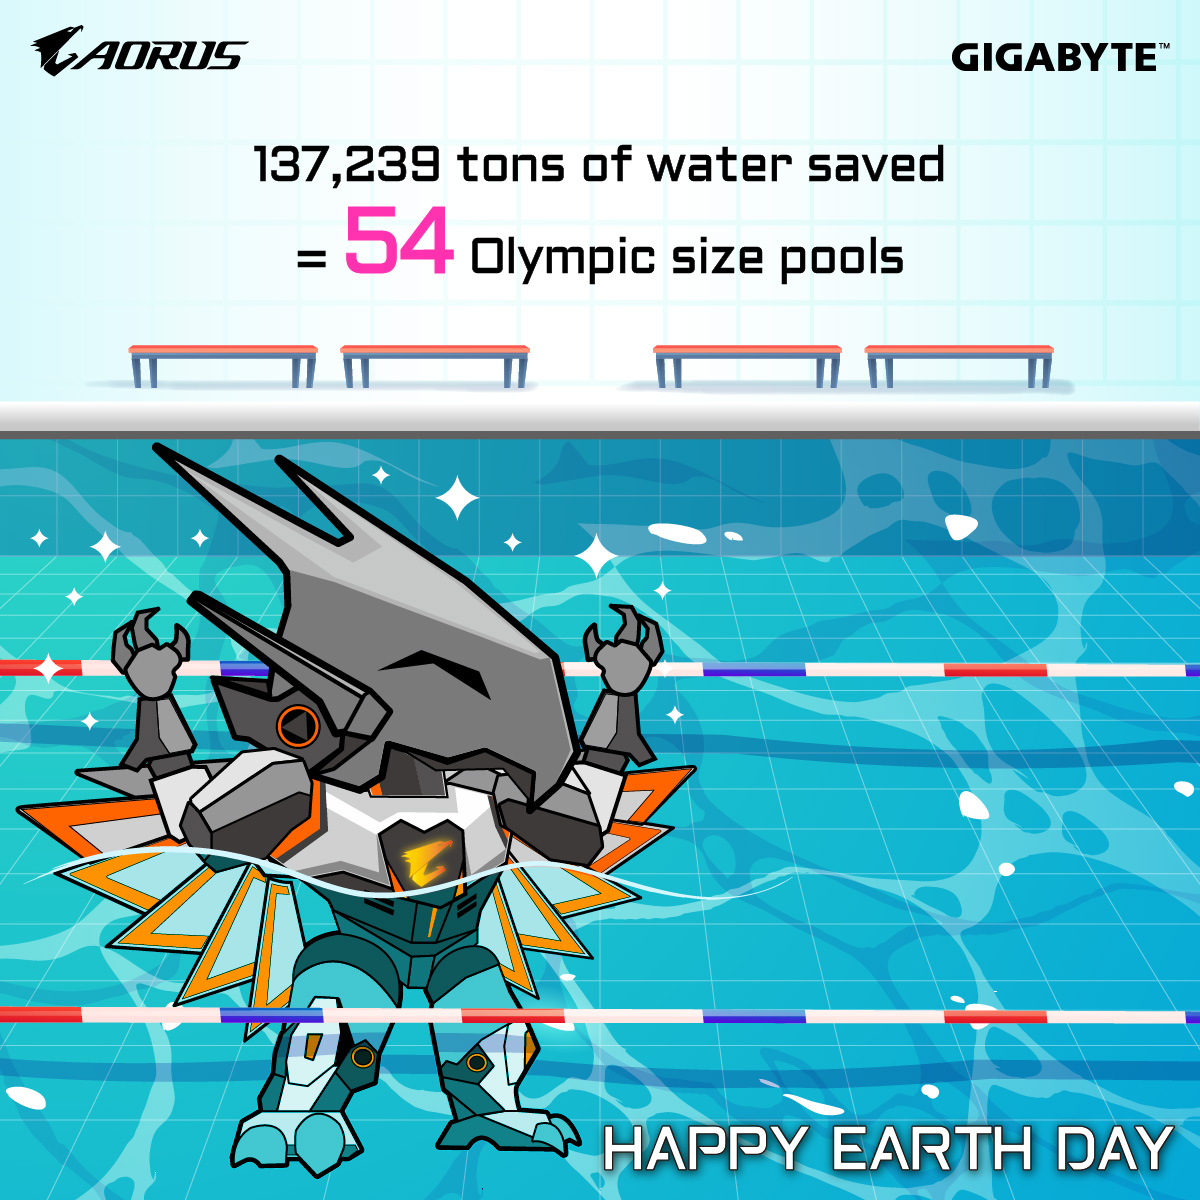 This #EarthDay, let's go viral for the planet!♻️ GIGABYTE has cut down 2,026.5 tons of CO2e in 2022 compared to the previous year.🤘🏼 Plus, we've conserved enough water to fill 54 Olympic-sized swimming pools compared to 2010.🏊 Share your eco-friendly tips with us!💖